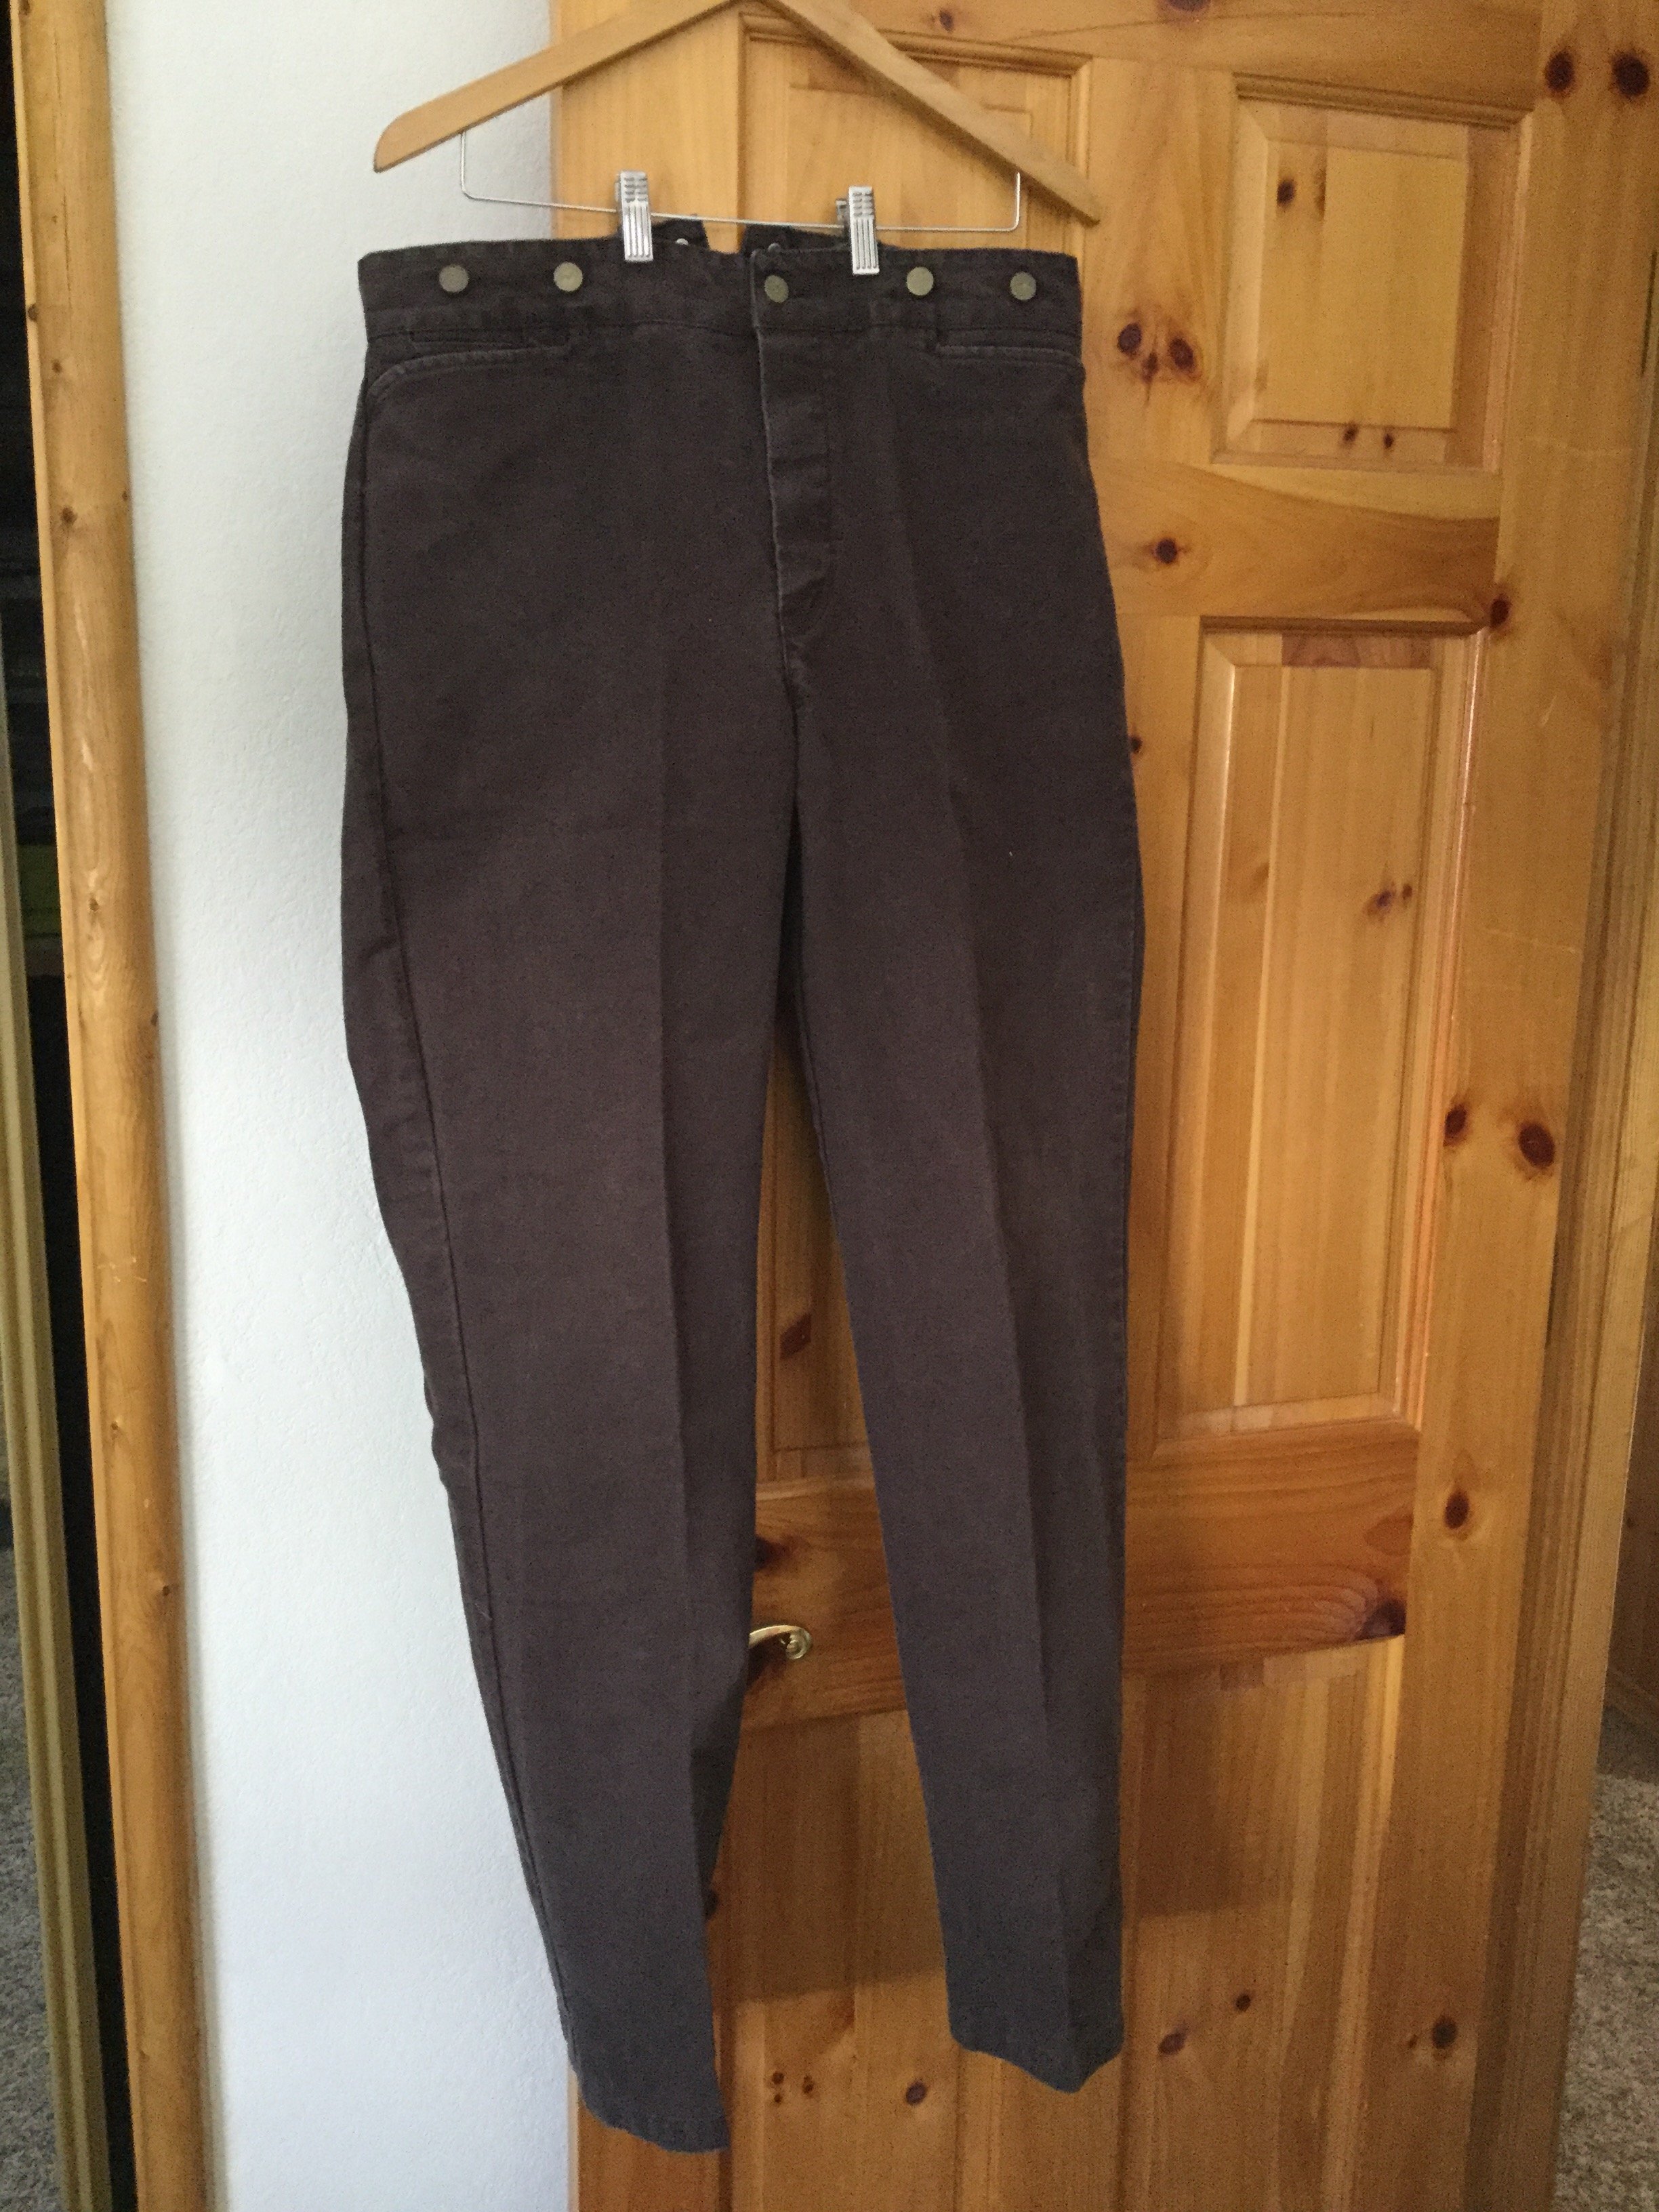 SOLD: 3 Pair Scully Pants 36W SLENDER - SASS Wire Classifieds - SASS ...